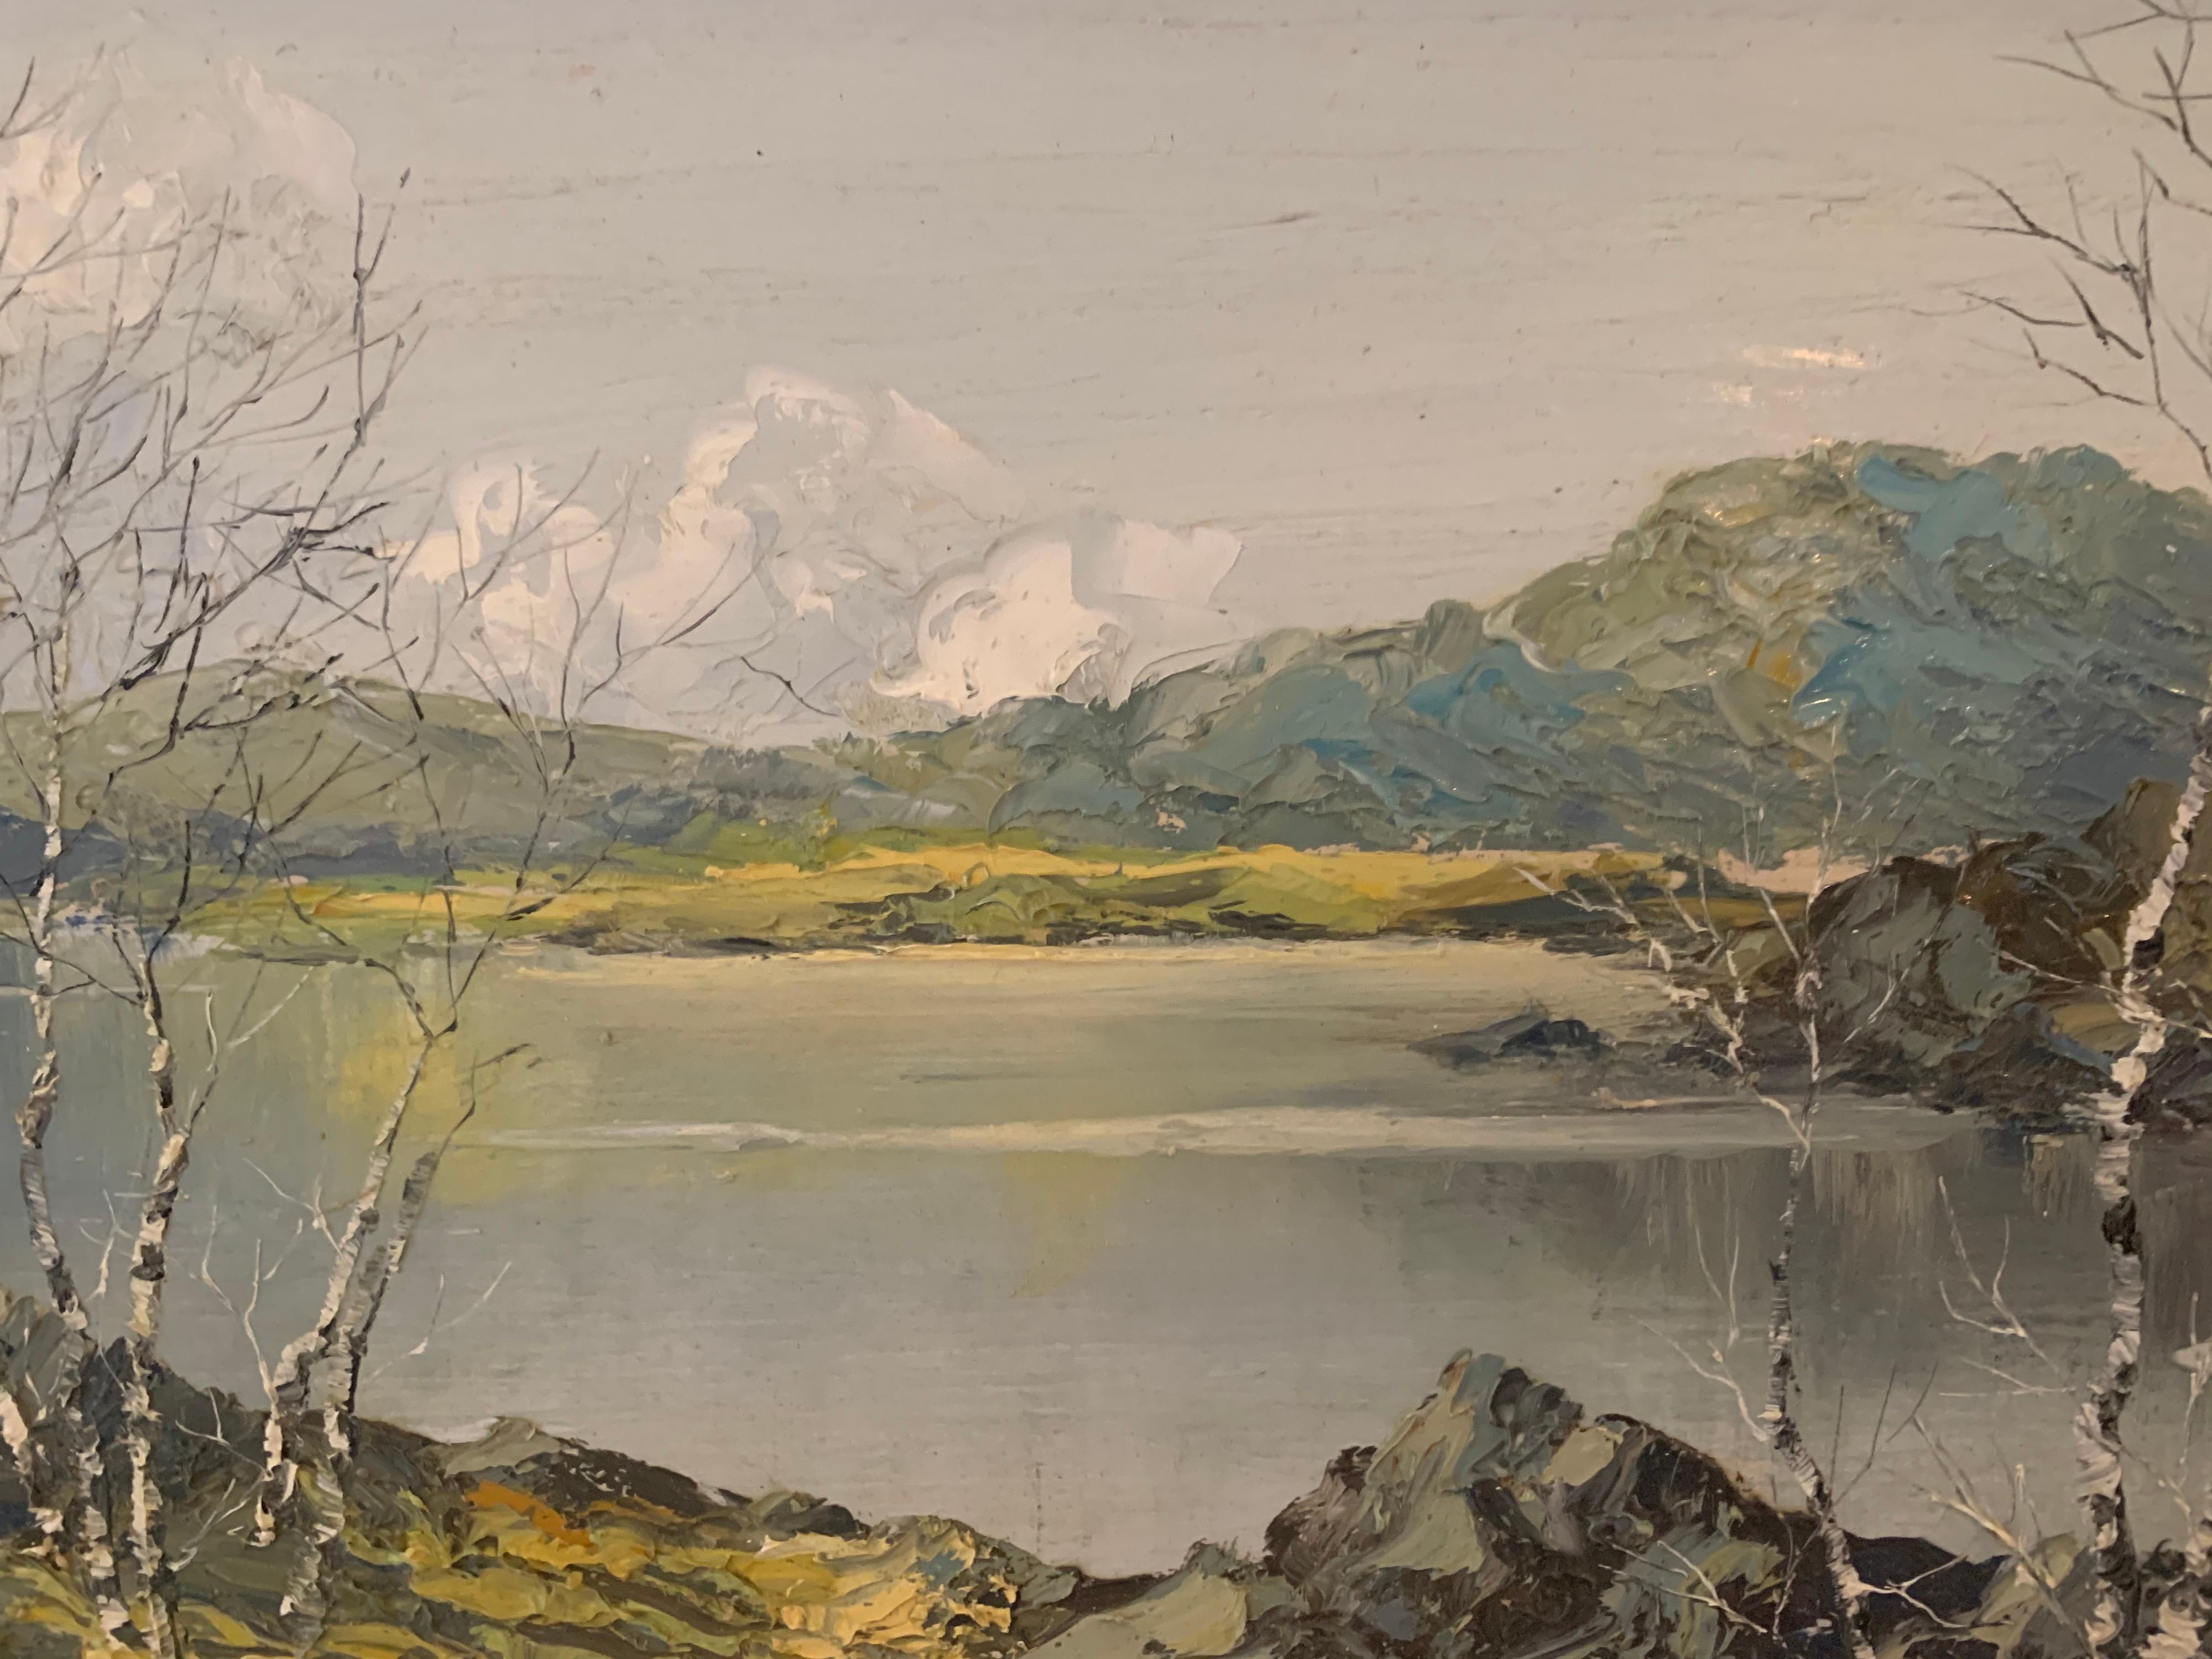 Oil Painting of Snowdon Mountains & Lakes in Wales by Modern British Artist For Sale 3